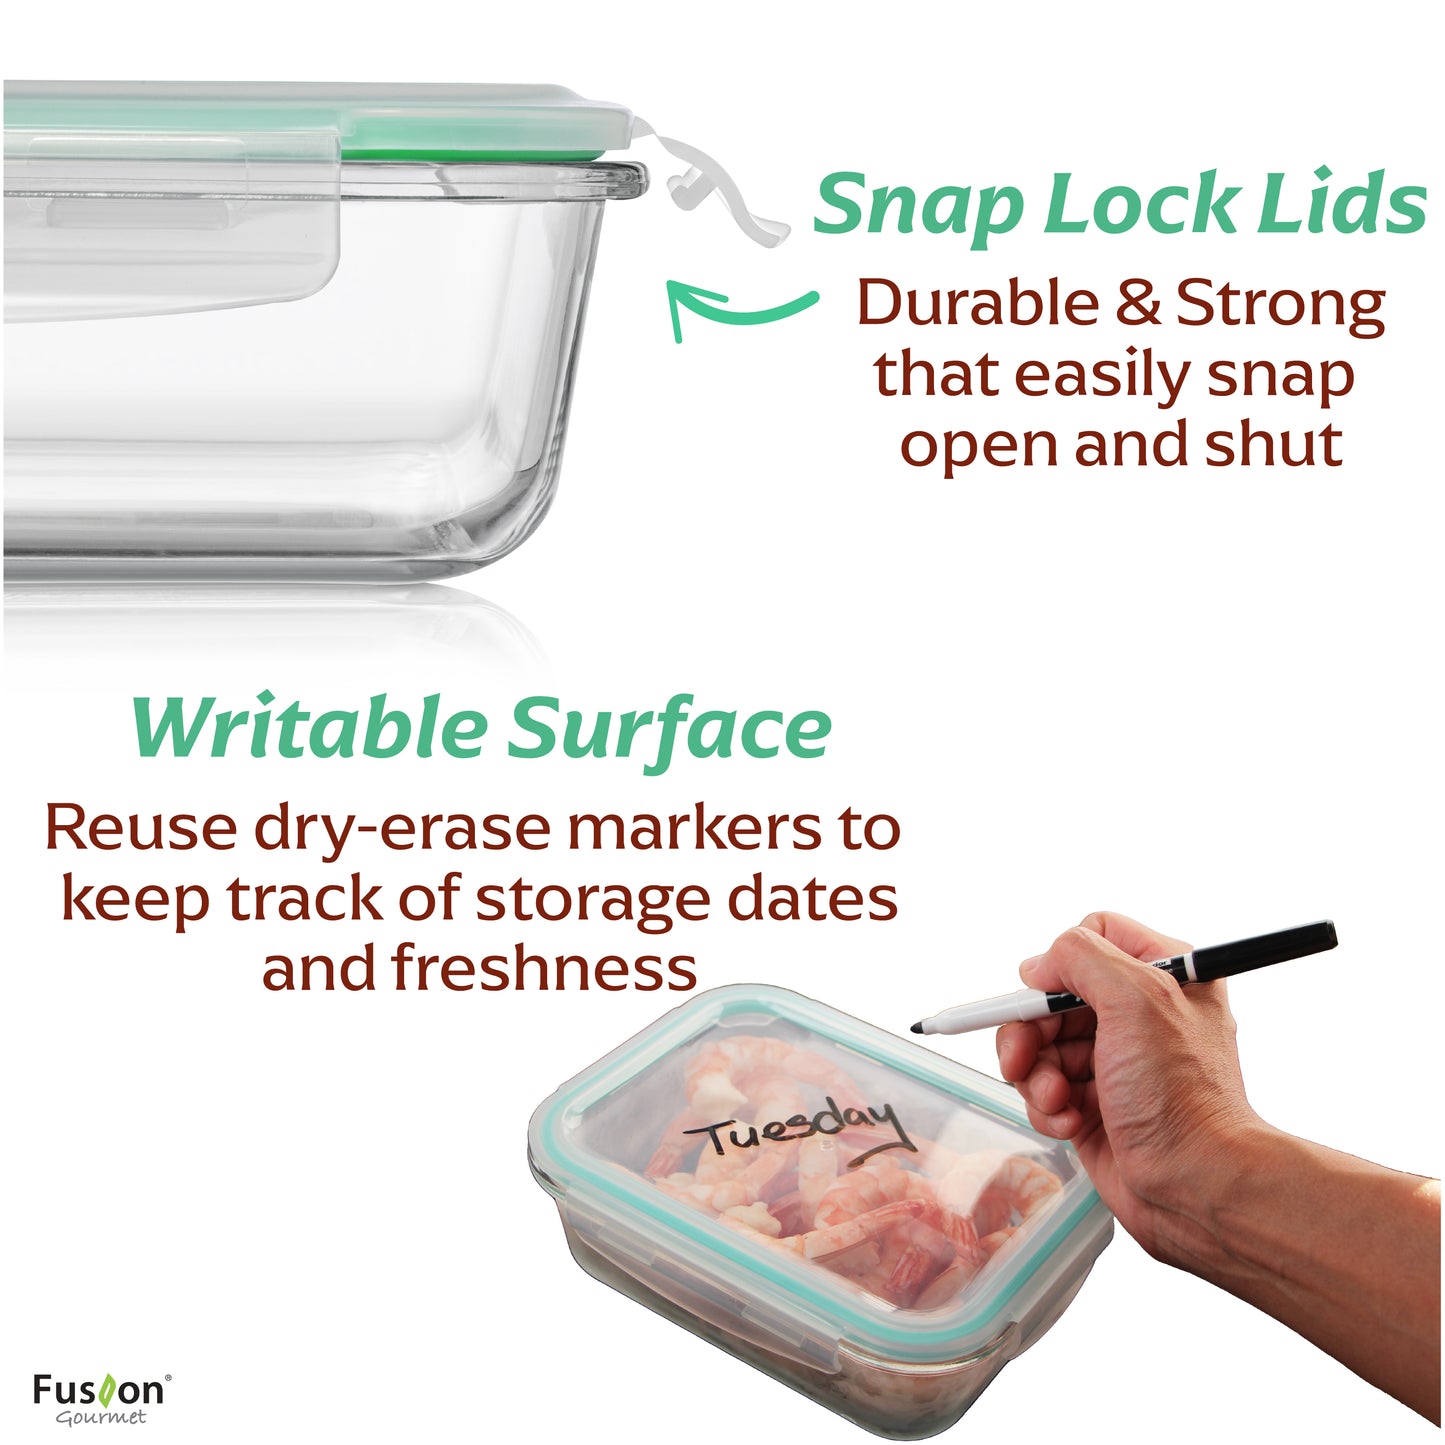 Microwavable Divided Food Storage Containers With Airtight Lock